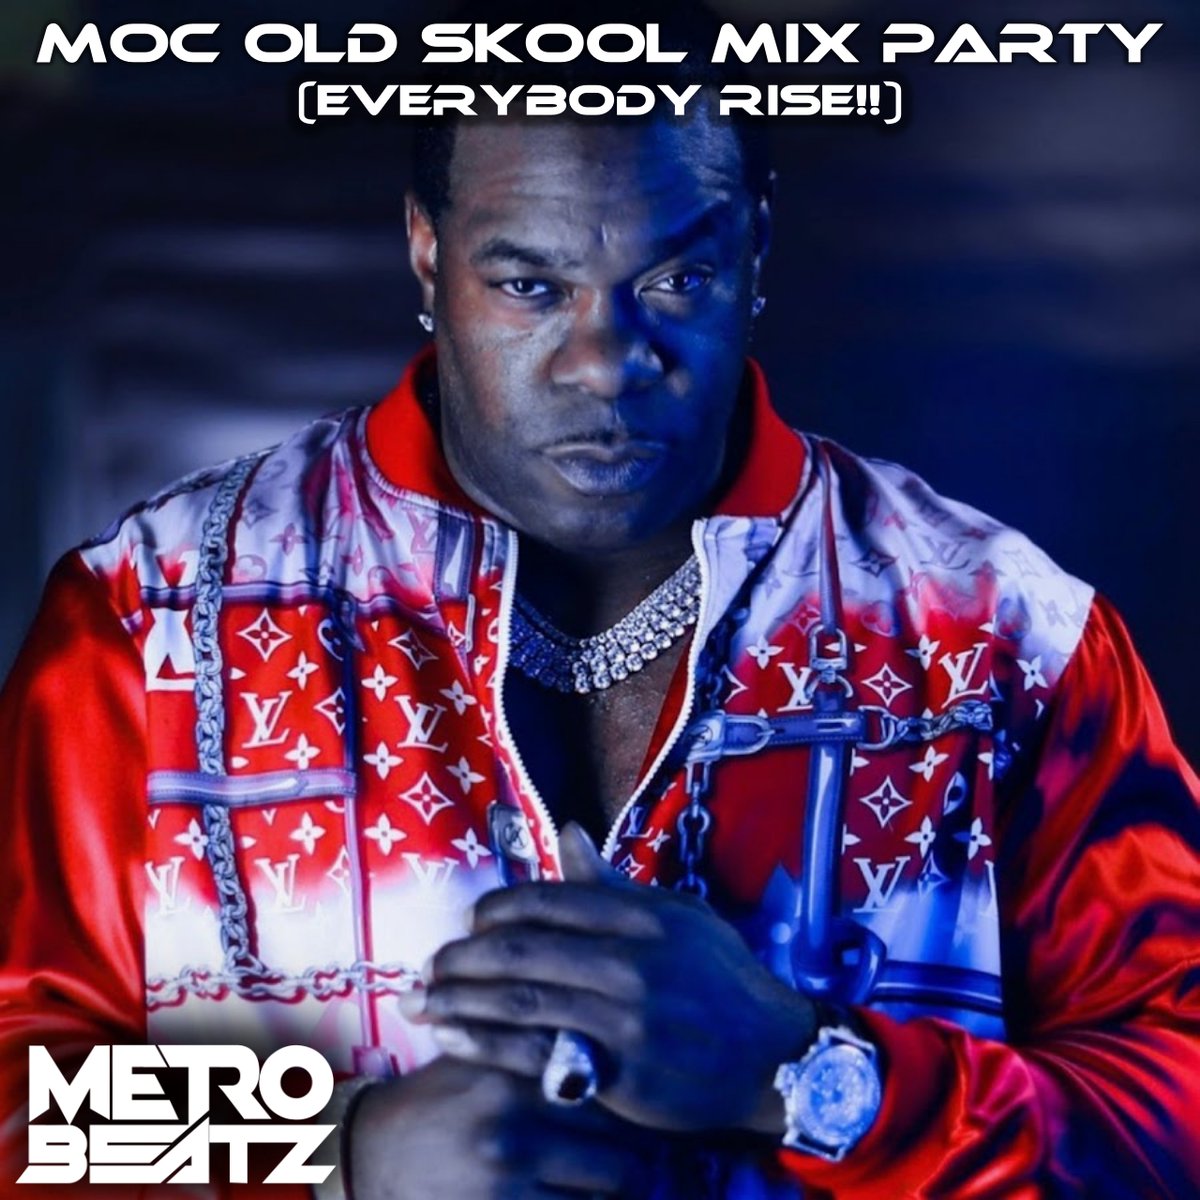 🚨 This evening @ 6pm (EST) it's a tribute to the legendary Busta Rhymes on mocradio with Metro Beatz! 🔥 Nuffsaid! 💯

📅 Saturdays, 6 PM (EST)
🌐 MOCRadio.com

🎶 Spread the word! 🙌✨ #BustaRhymes #MOCOldSkoolMixParty #MetroBeatz #HipHopClassics #mocradio